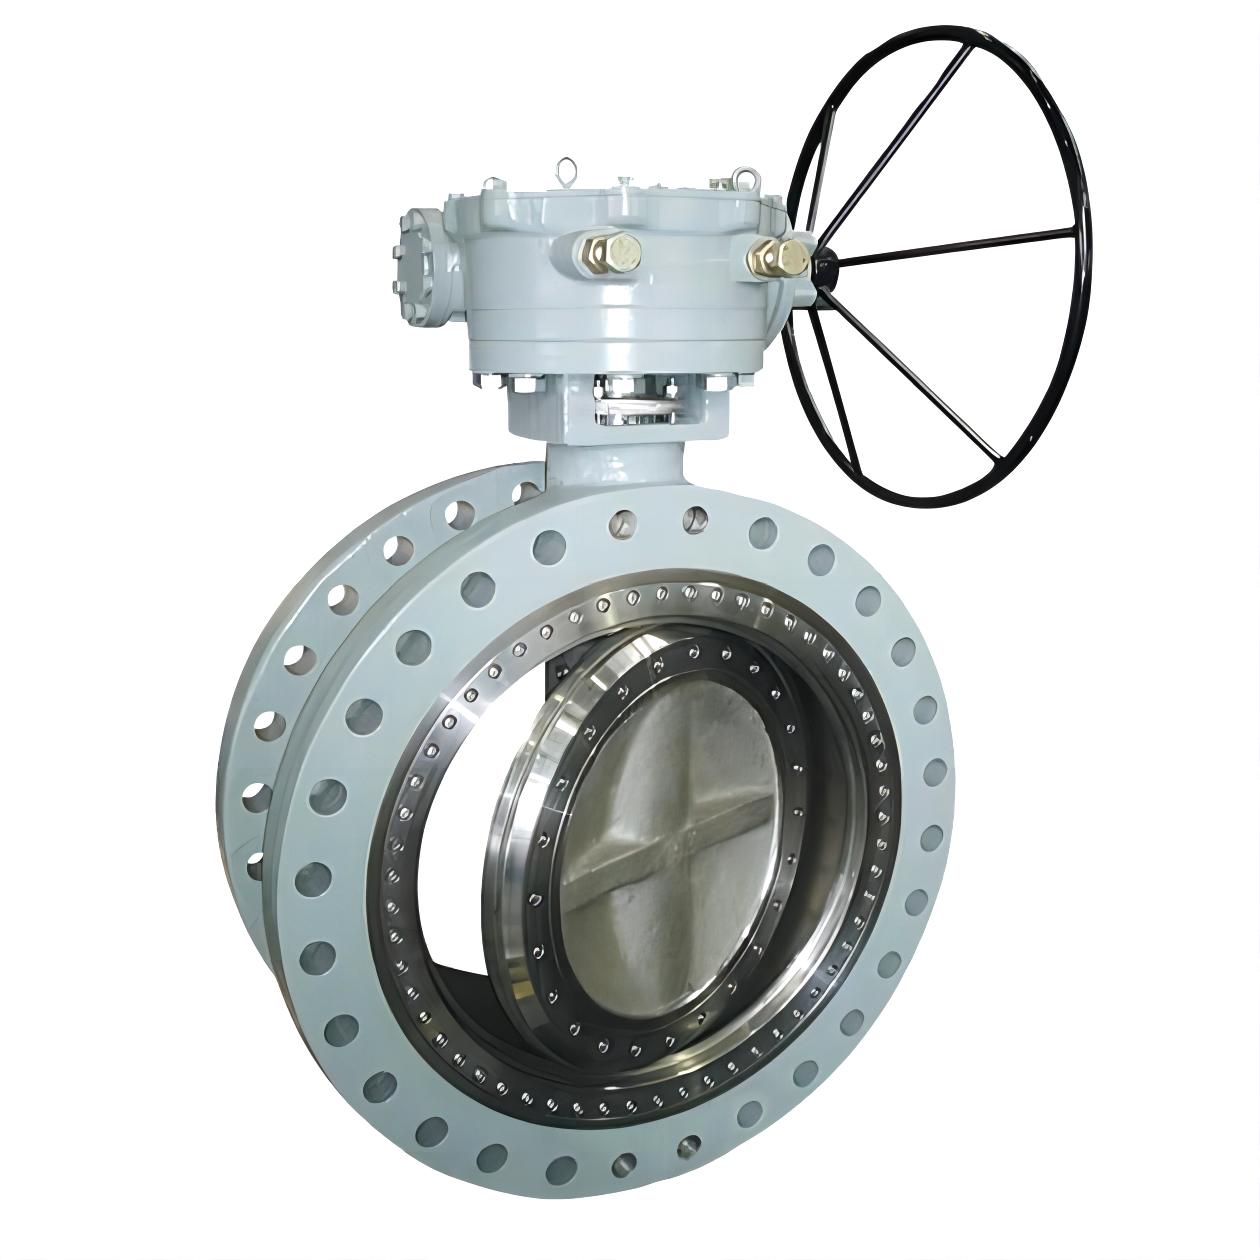 Flange Style Triple offset Butterfly Valve-Metal Seated